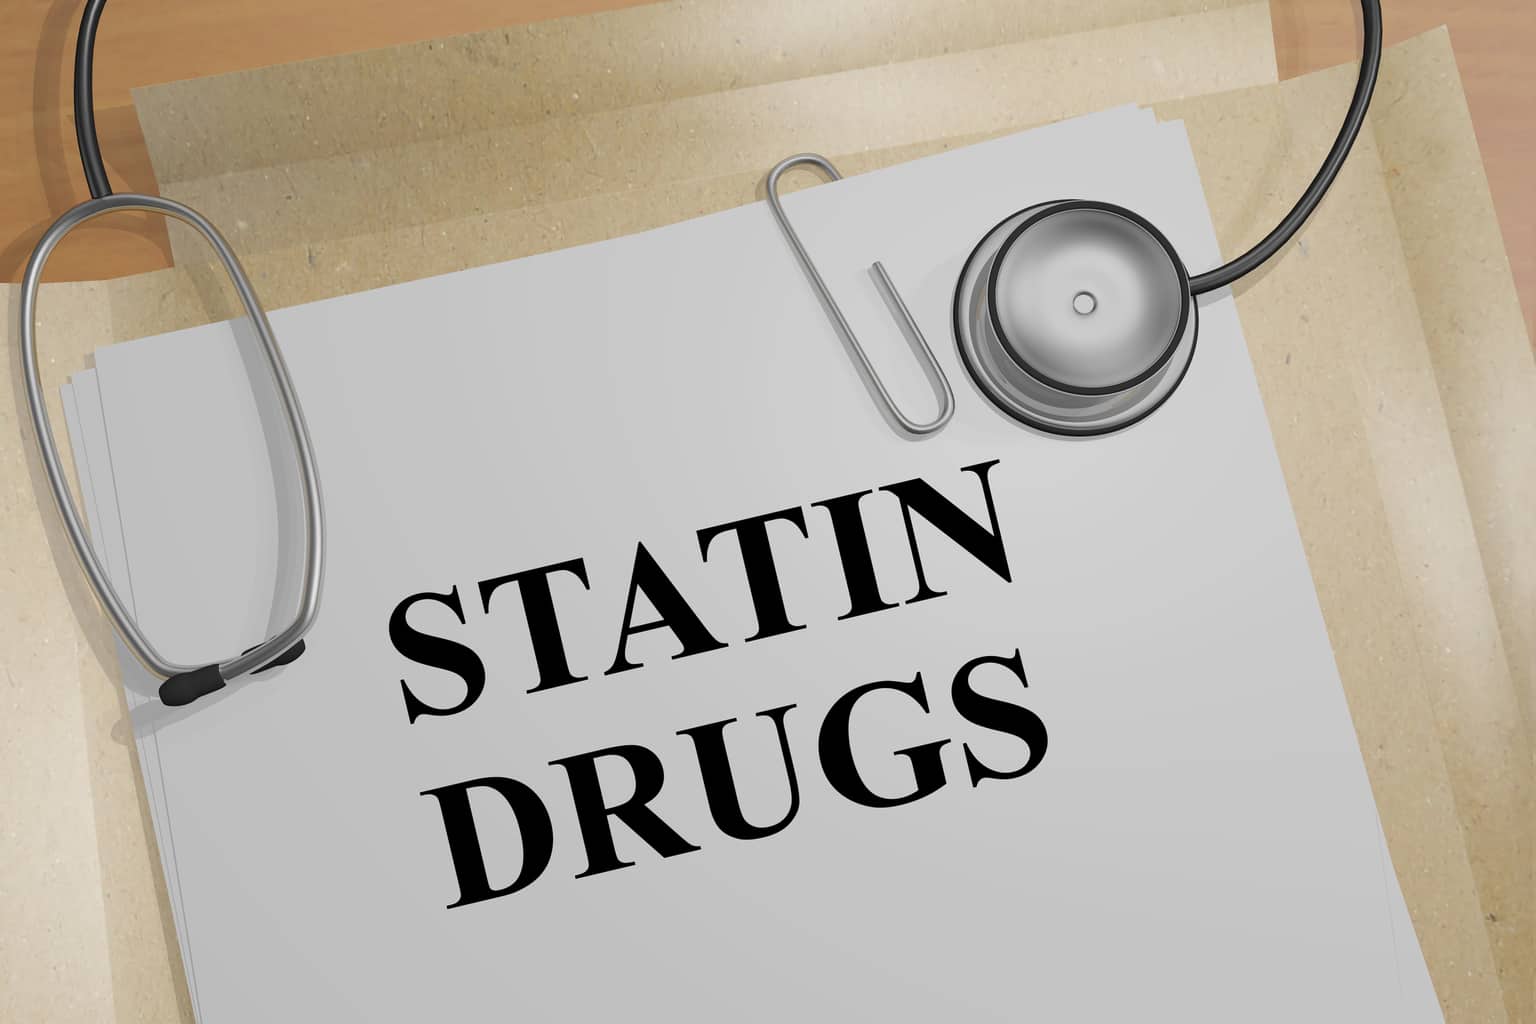 A new study shows statin drugs are very toxic to the liver and muscles